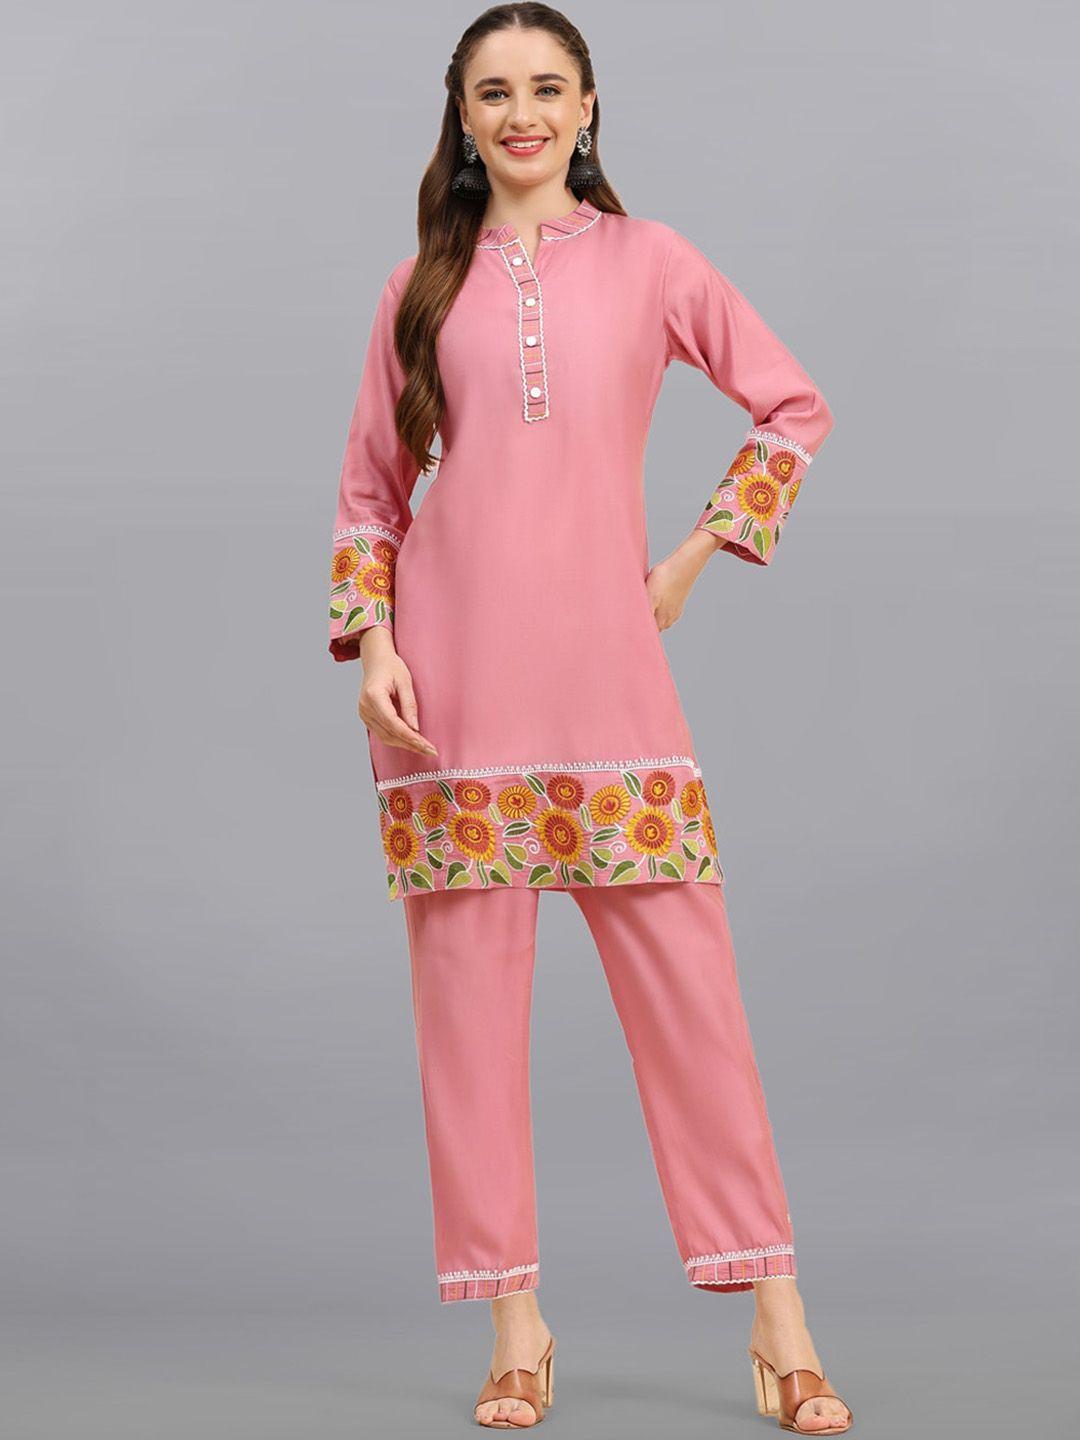 growish embroidered top & trousers co-ords set